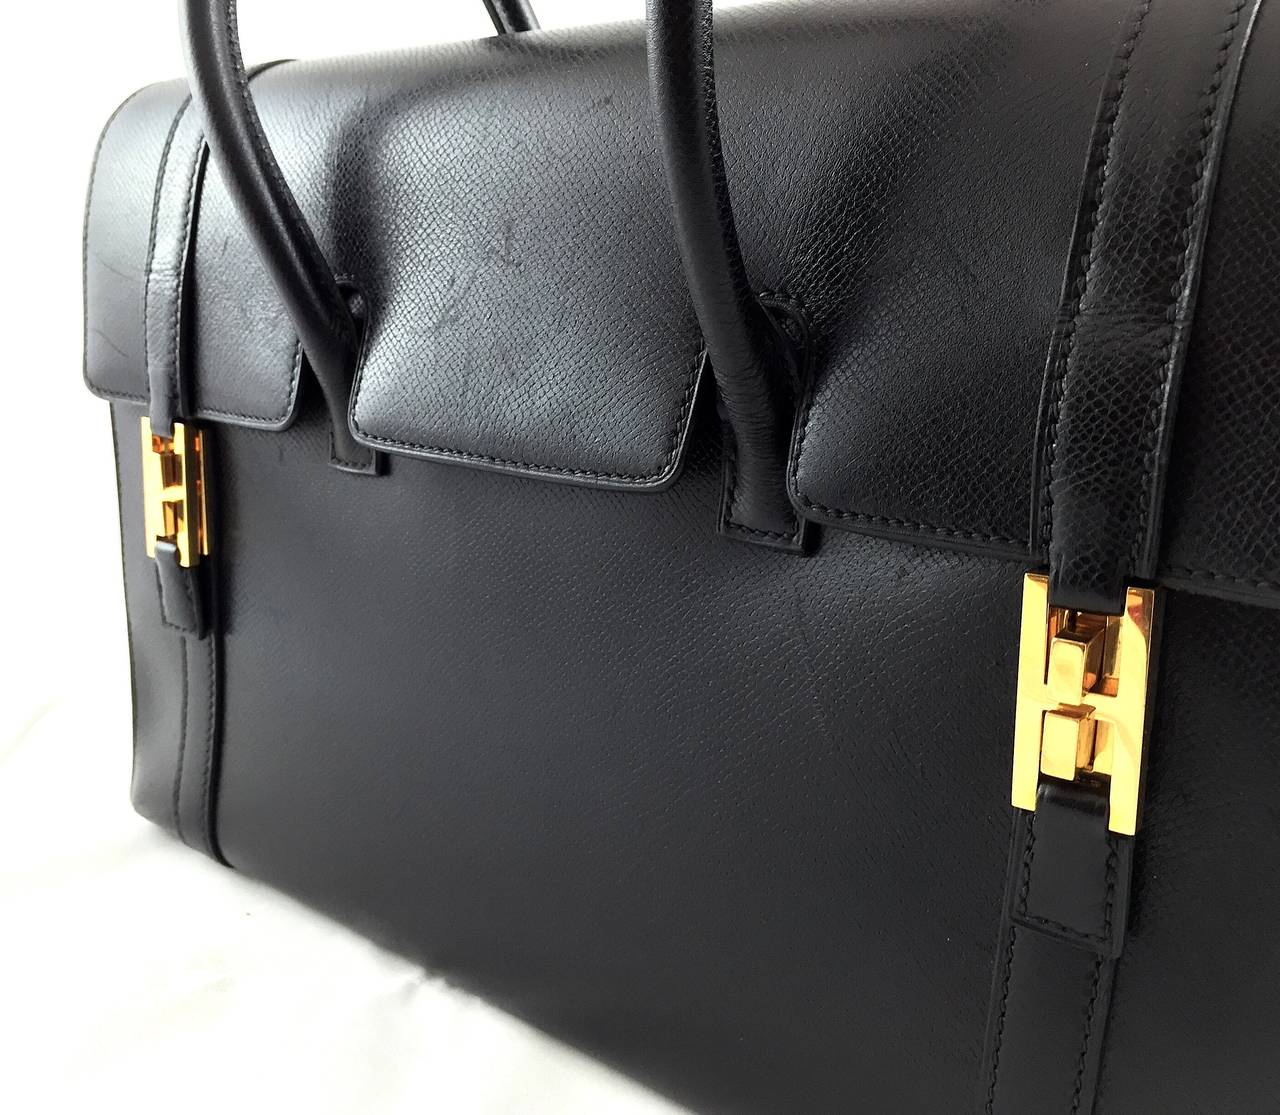 Gorgeous Hermès 32 Drag Bag in black epsom leather from 2003 (stamp square G). This hard-to-find and very convenient handbag by Hermès features gold-tone hardware, double leather straps, and a flap closure with two H clasps at front. The interior